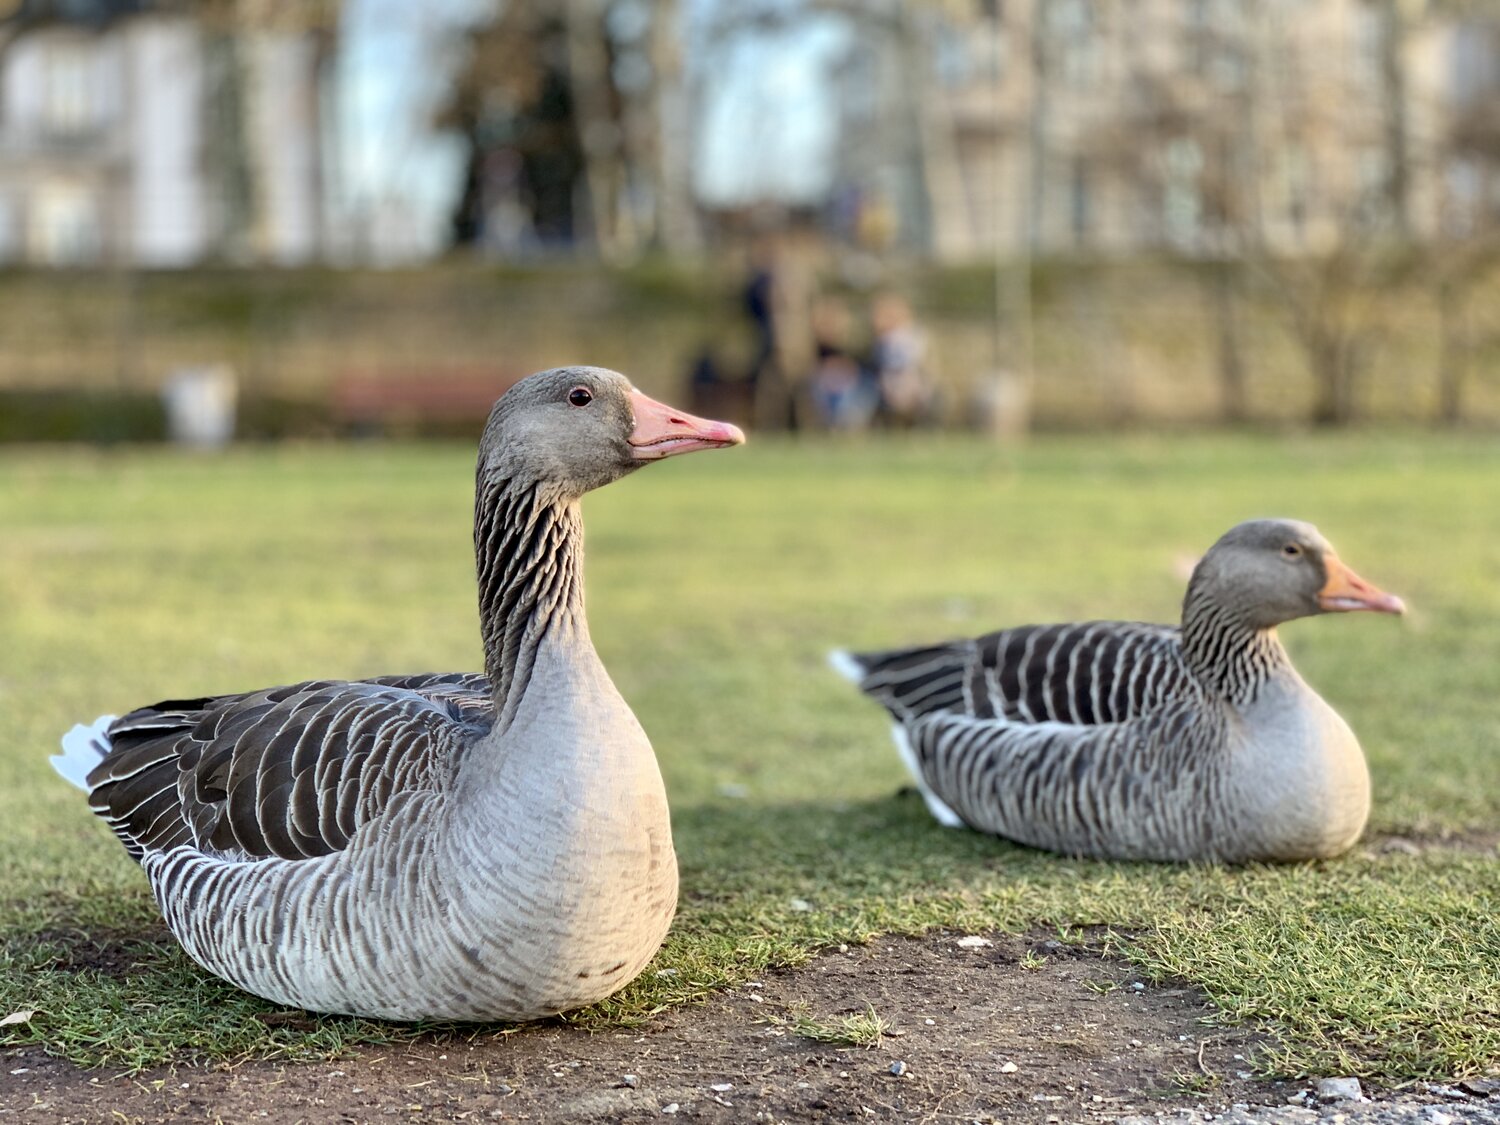 Answer These 22 Questions to Find Out If You Have Enough General Knowledge geese goose